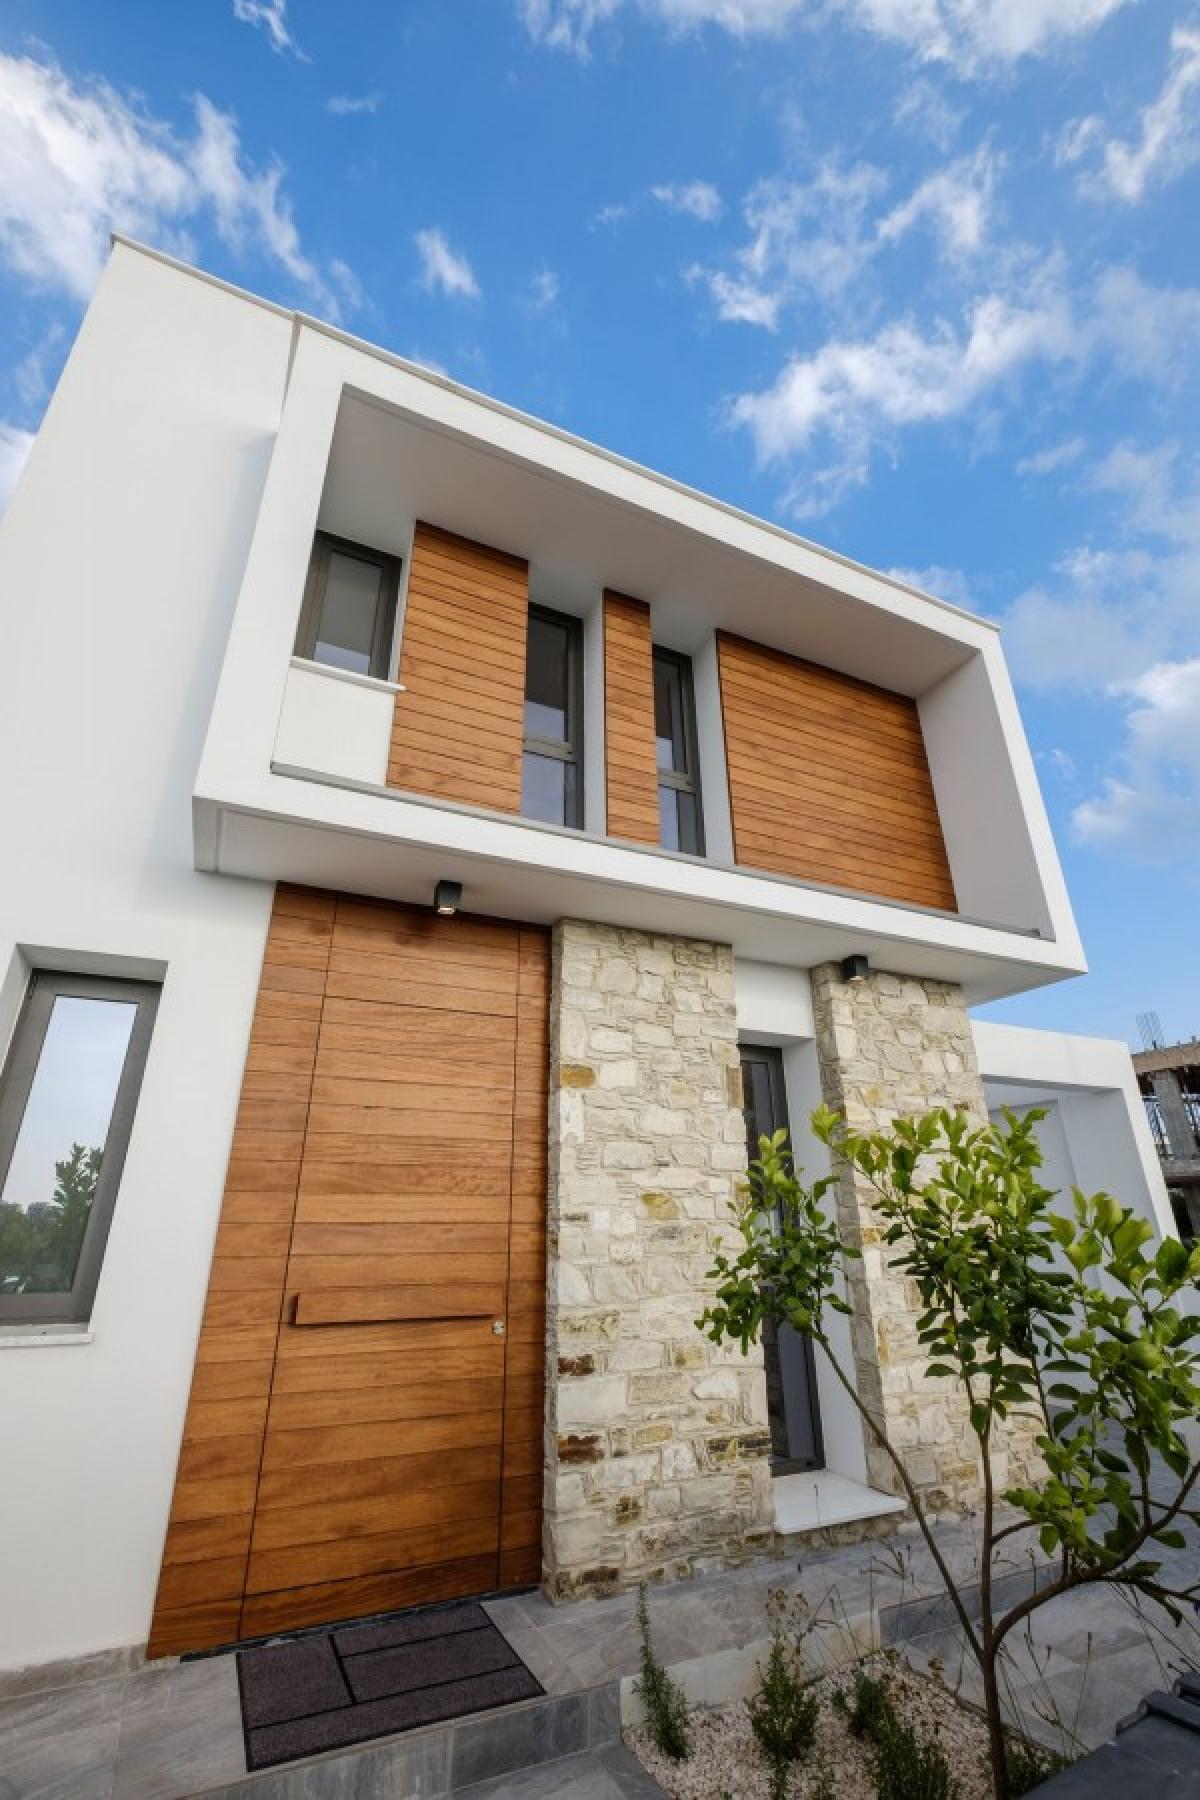 Picture of Home For Sale in Livadia, Larnaca, Cyprus